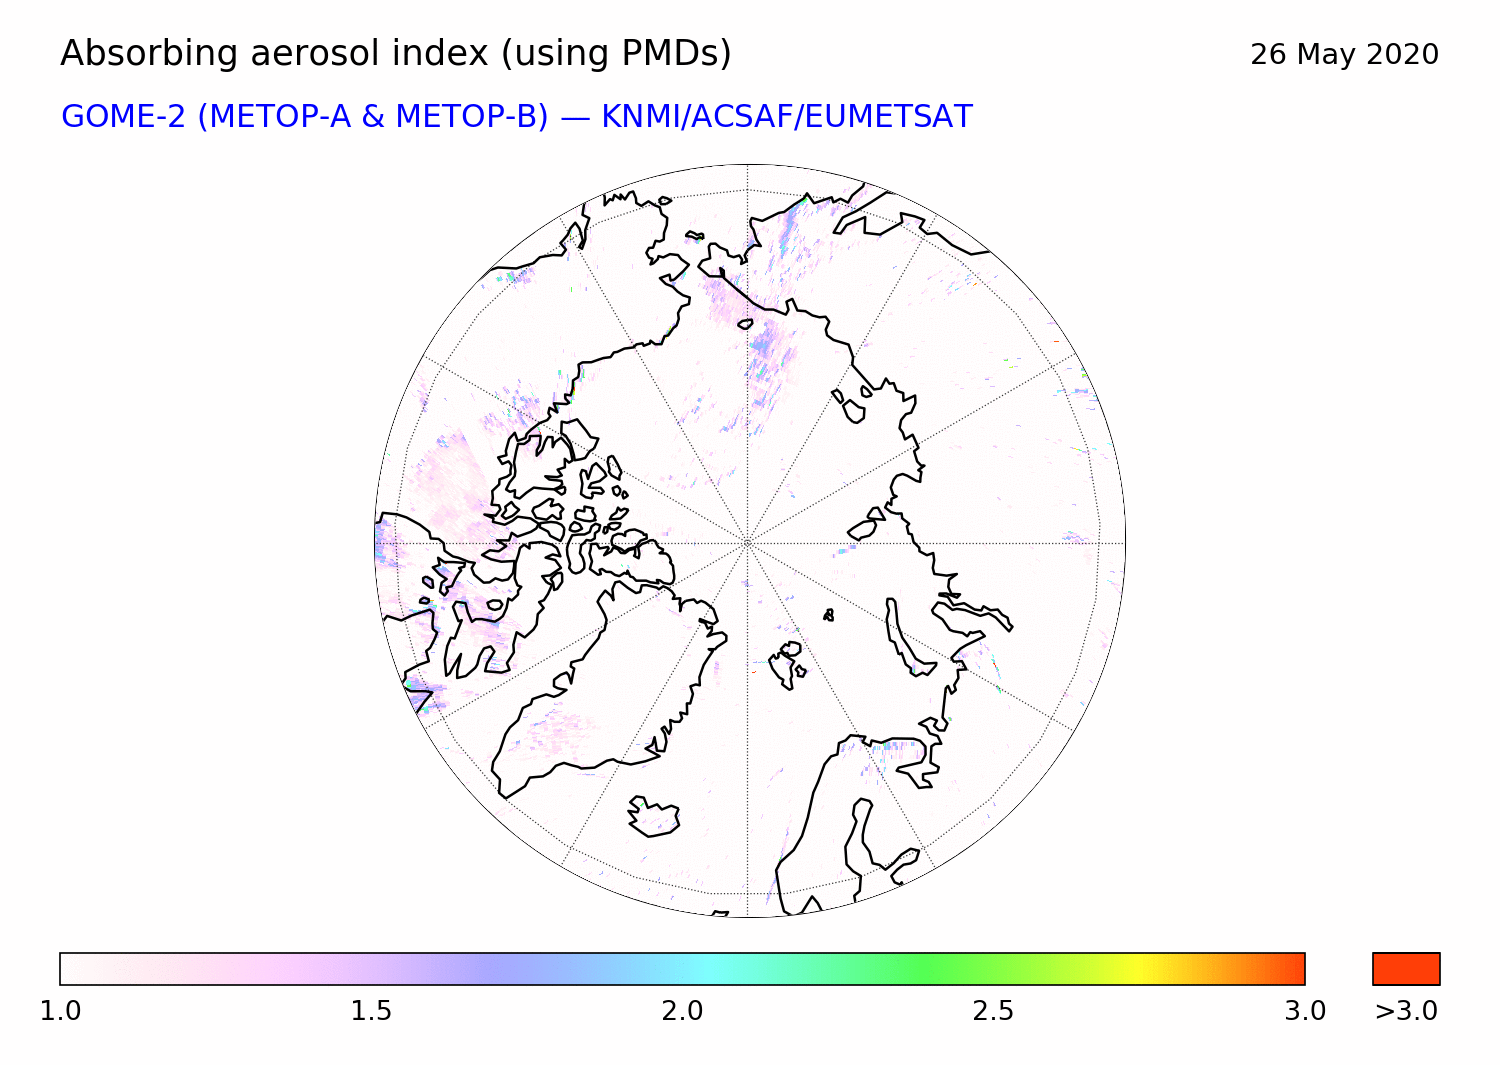 GOME-2 - Absorbing aerosol index of 26 May 2020